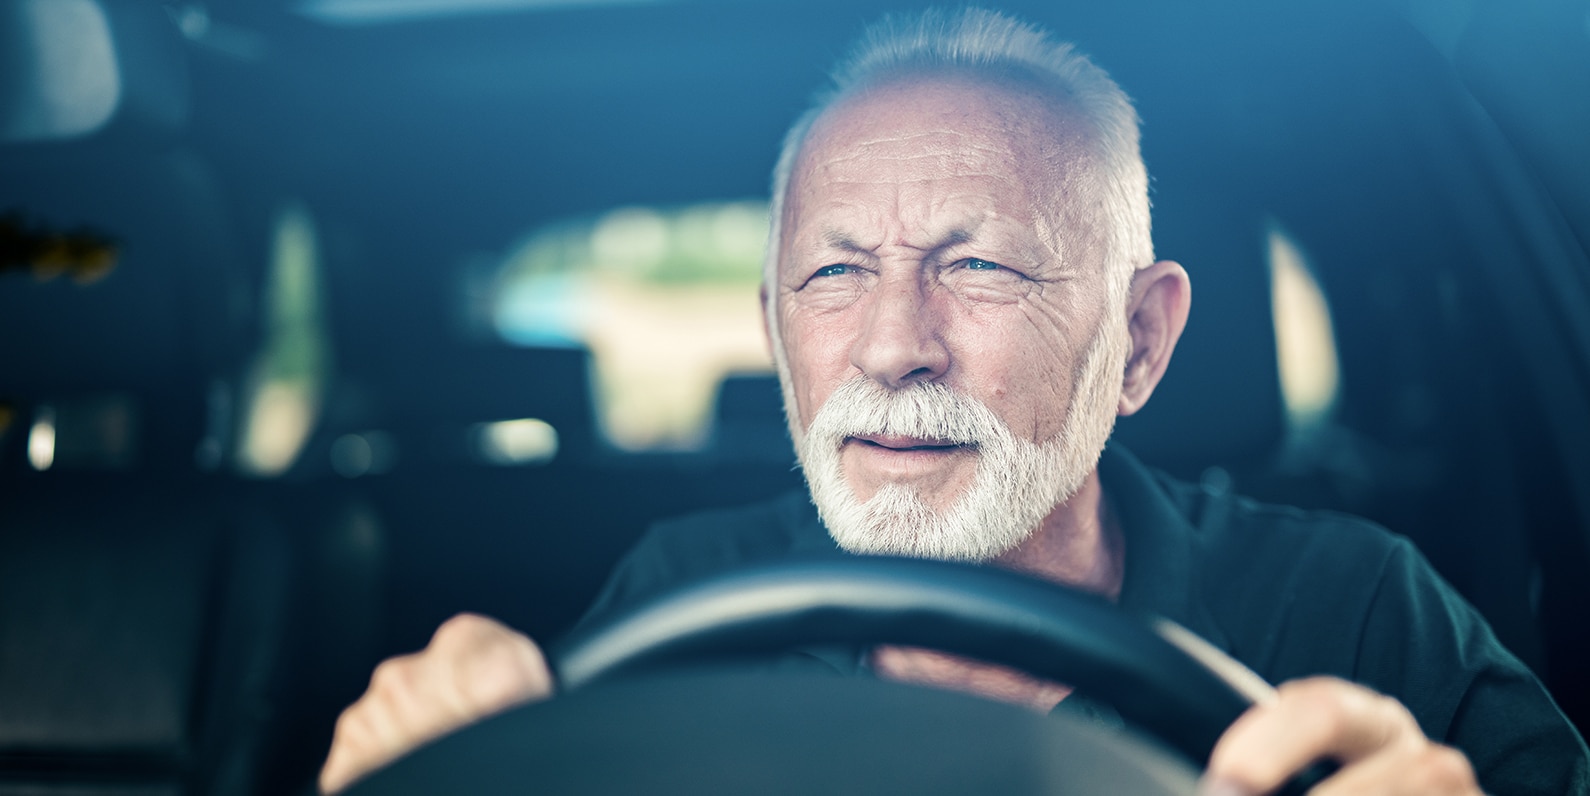 Elderly Drivers & Diminished Driving Skills